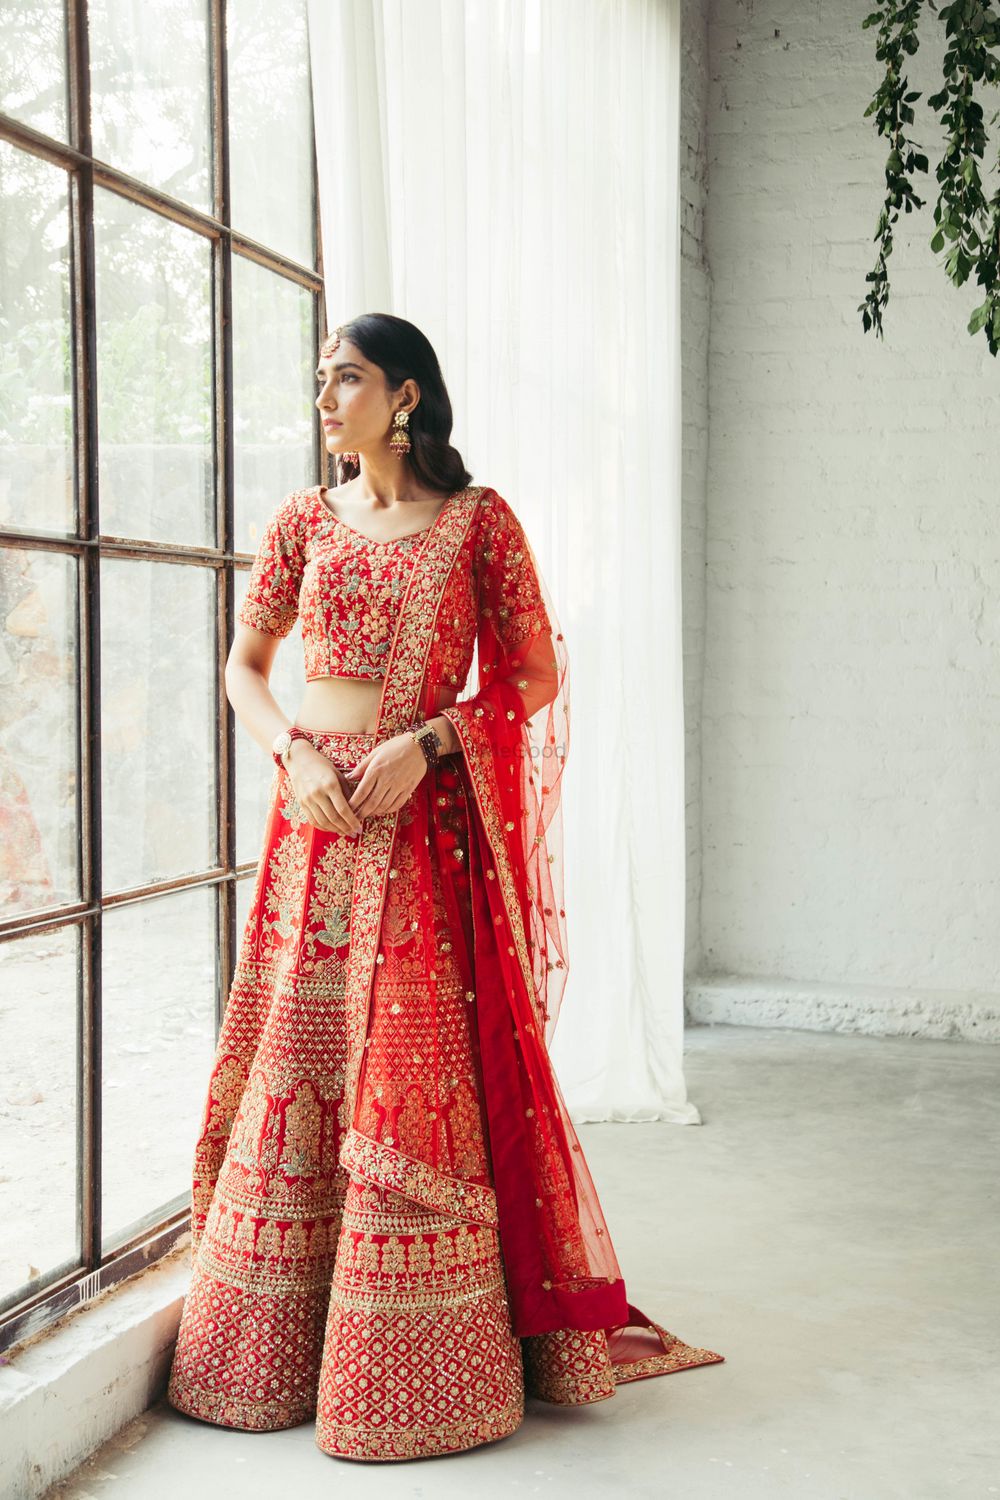 Photo of Nice bridal lehenga in traditional red